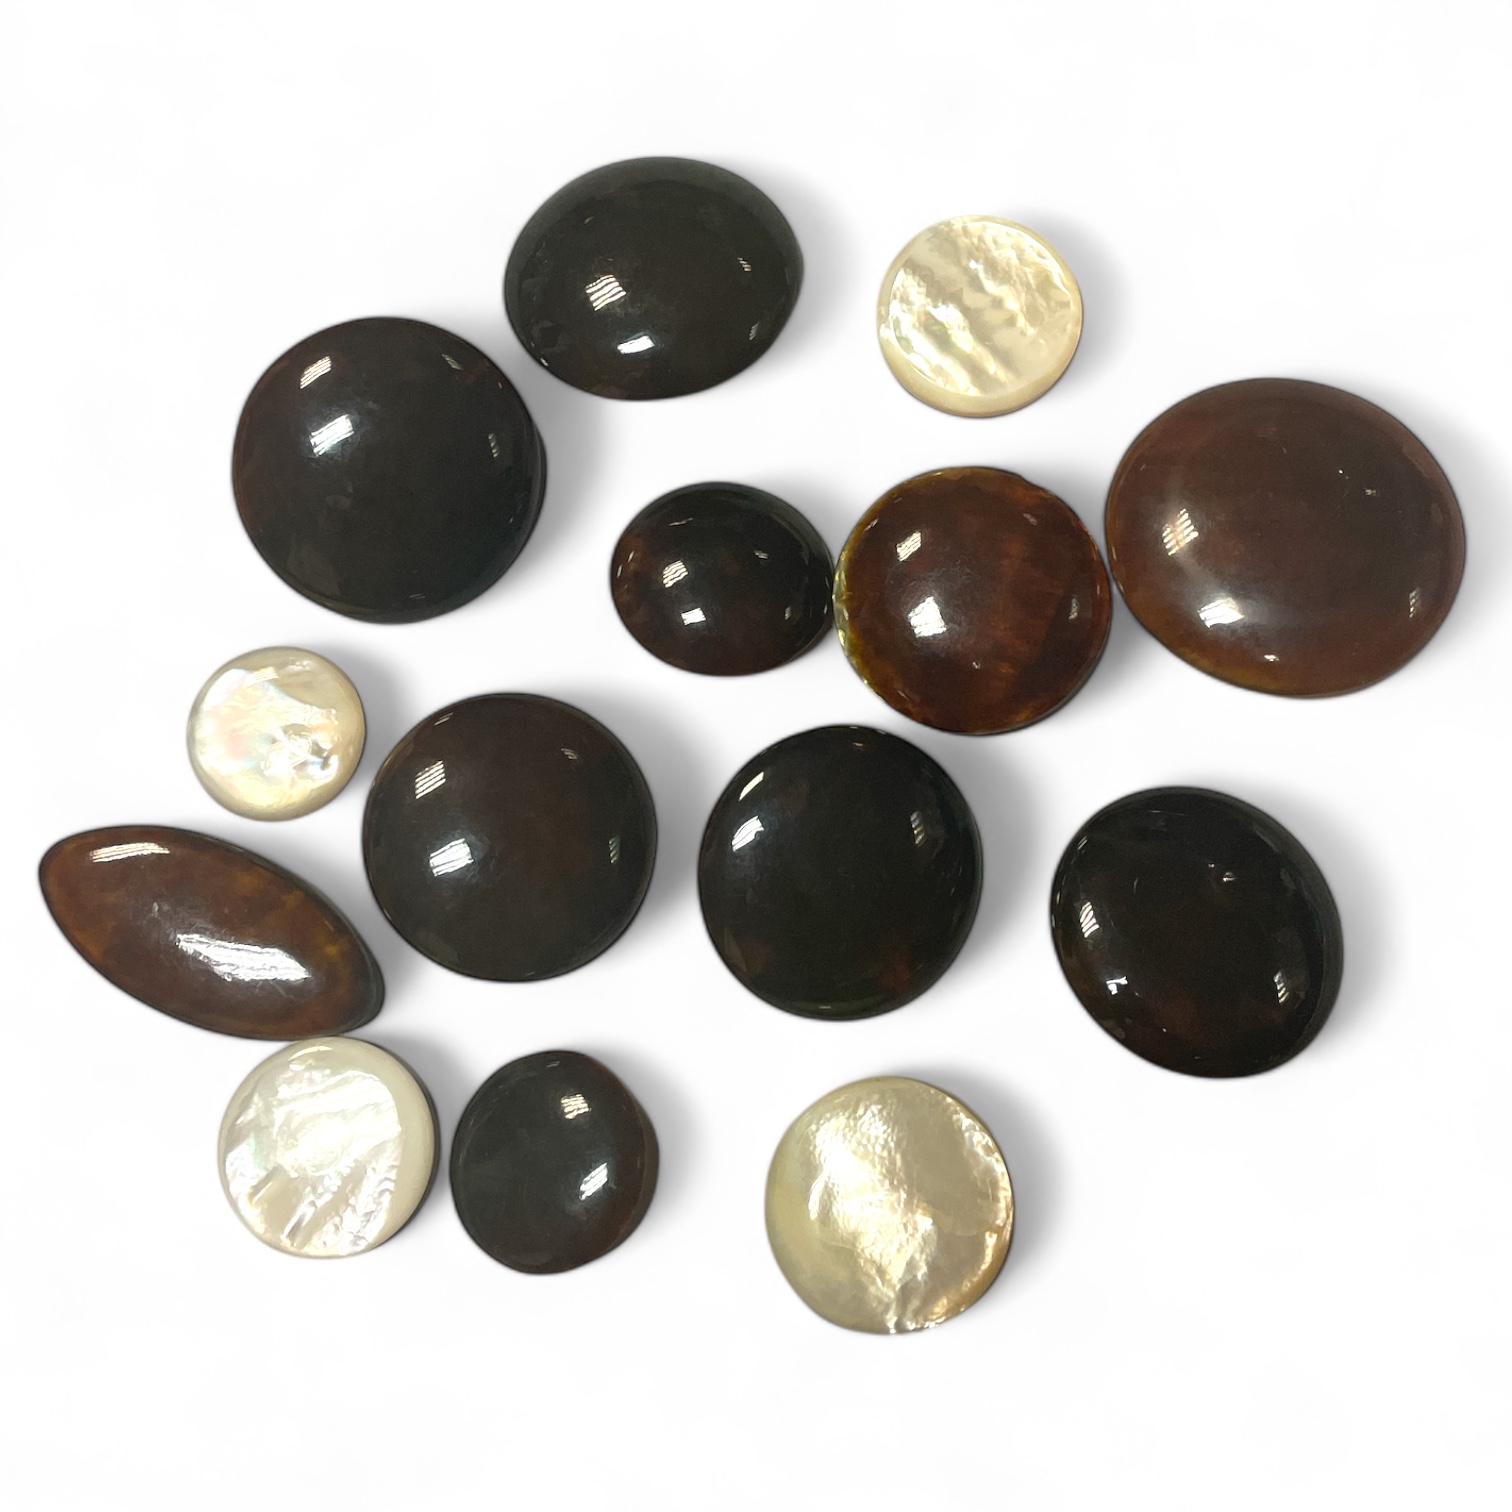 A collection of tortoiseshell and mother of pearl buttons, graduating from 6m to 3cm diameter. 14 in